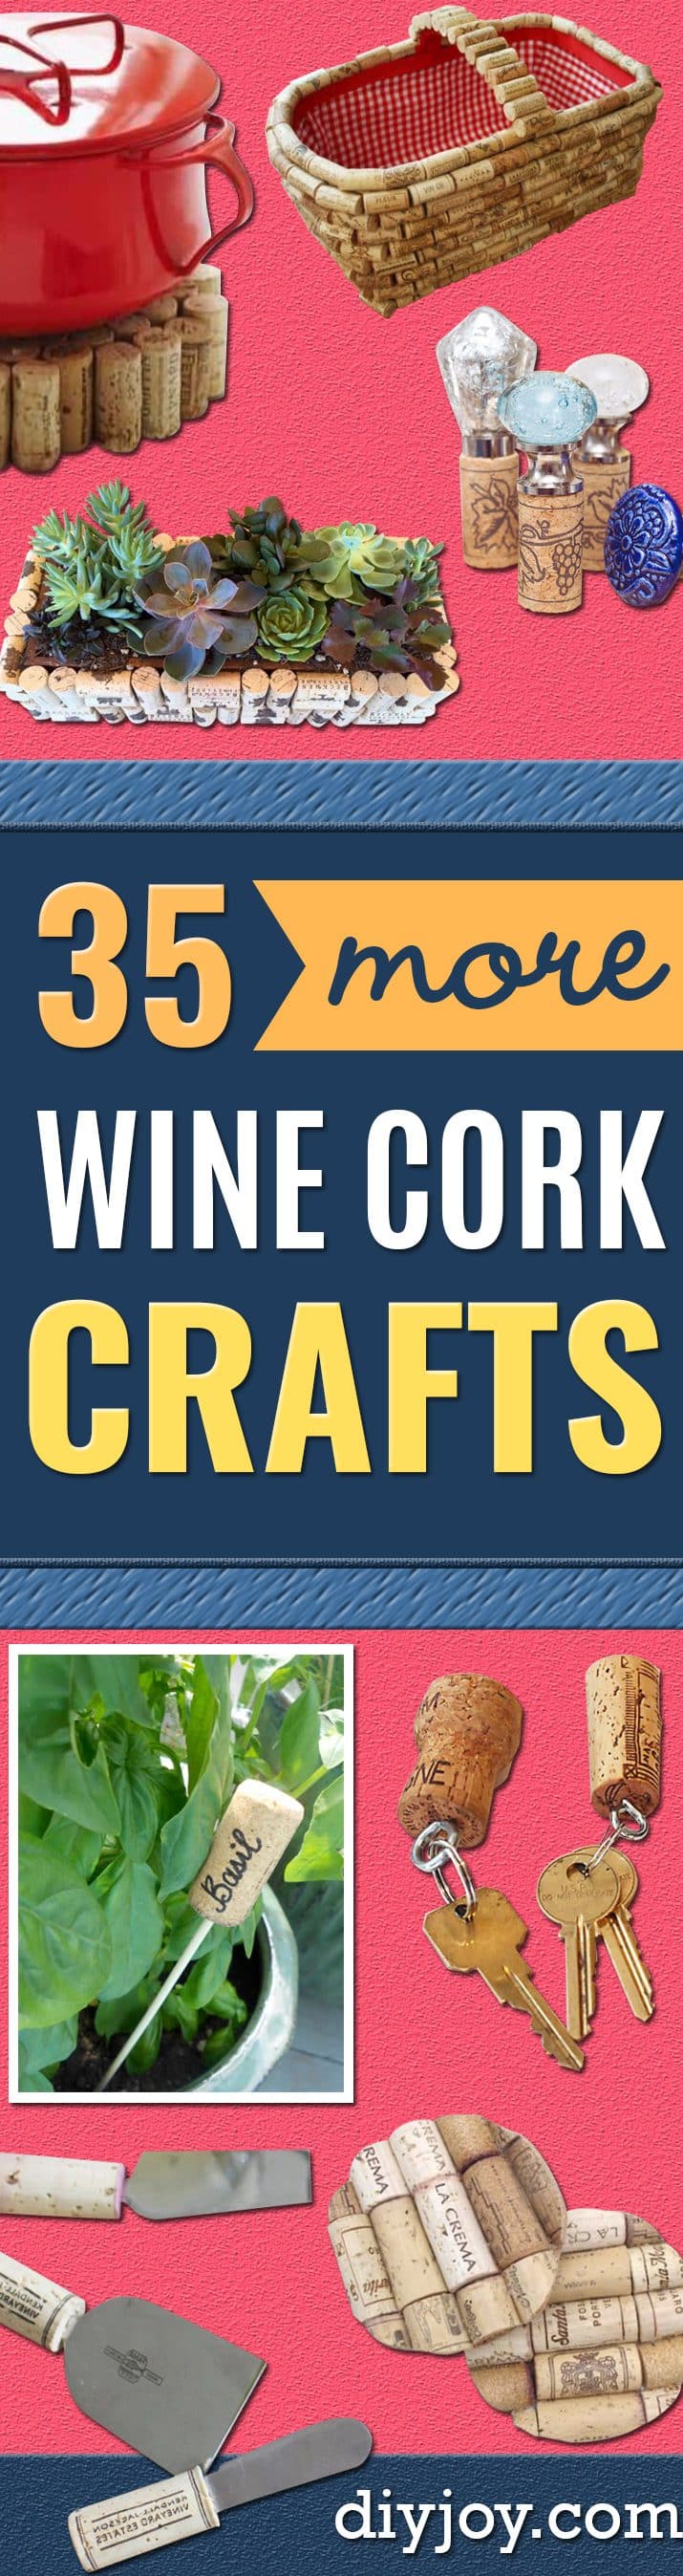 Wine Cork Crafts and Craft Ideas With Wine Corks - Cool Projects to Make With Old Wine Cork - Outdoor and Garden, Easy Wall Art, Fun DIY Gifts and Cheap Crafts for Adults - Cheap Things to Make and Sell on Etsy